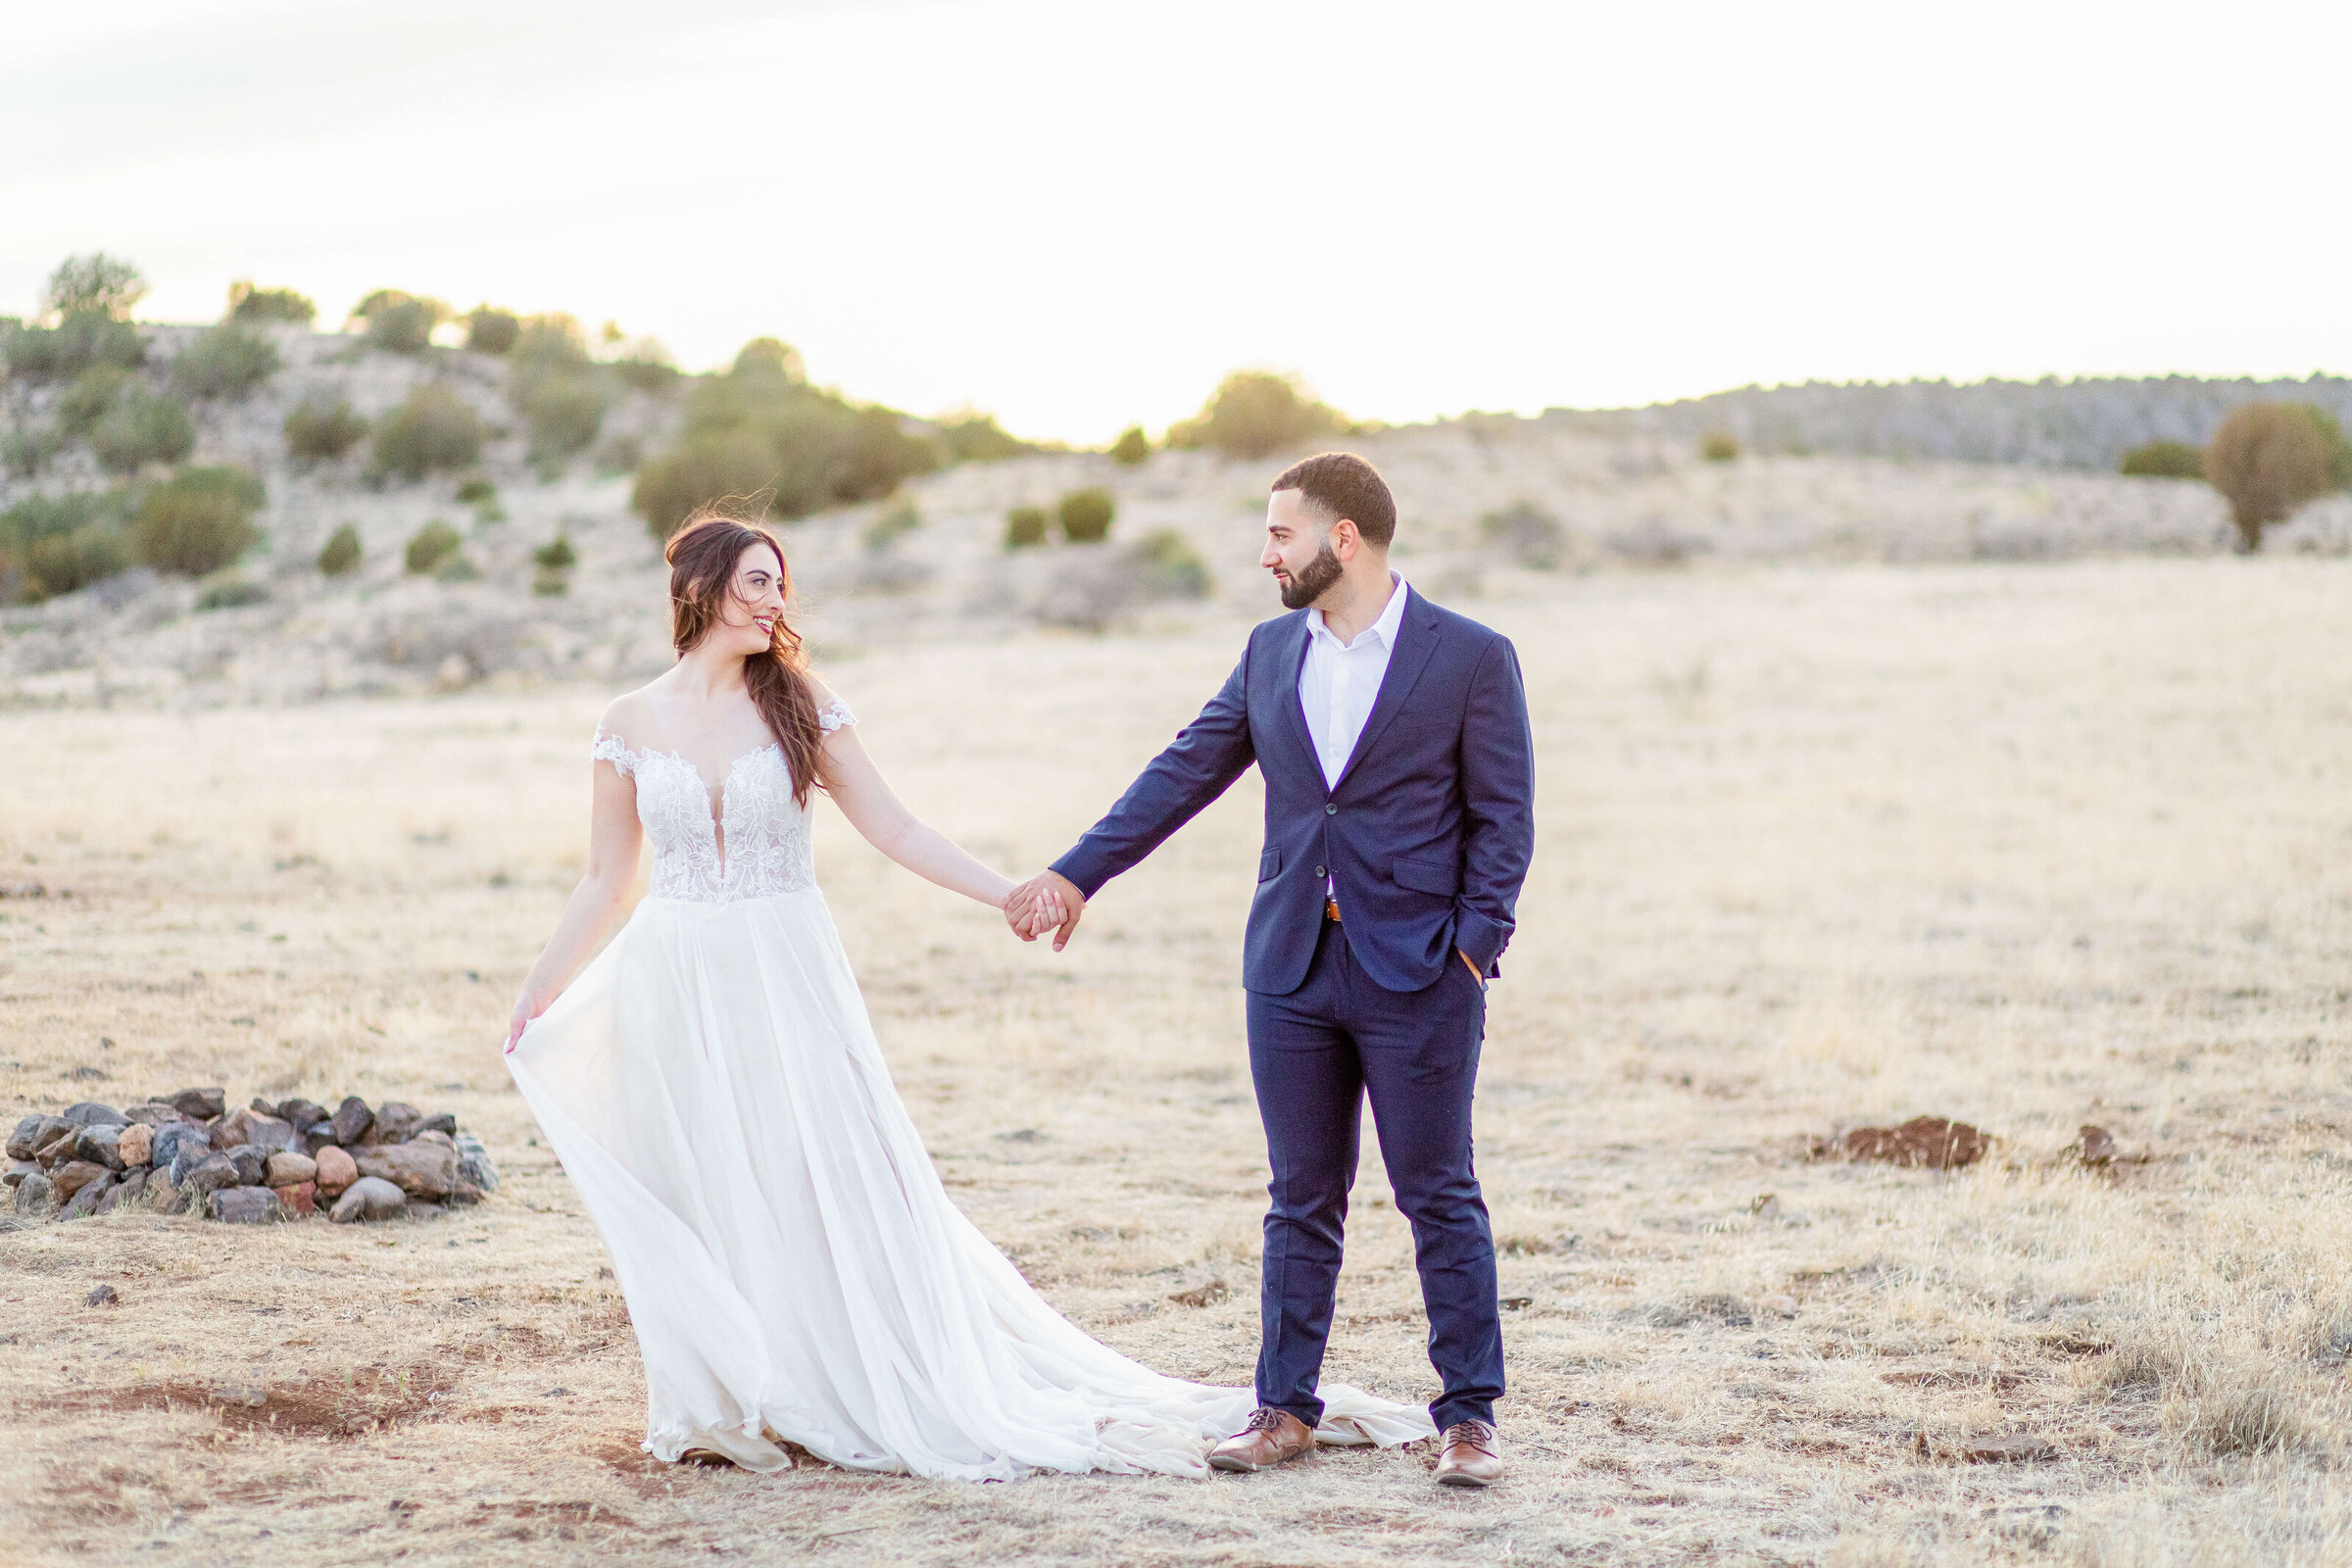 A bride and groom hold hands in the middle of the desert in Arizona. The sun is setting and the field is golden. Taken by a Cincinnati wedding photographer